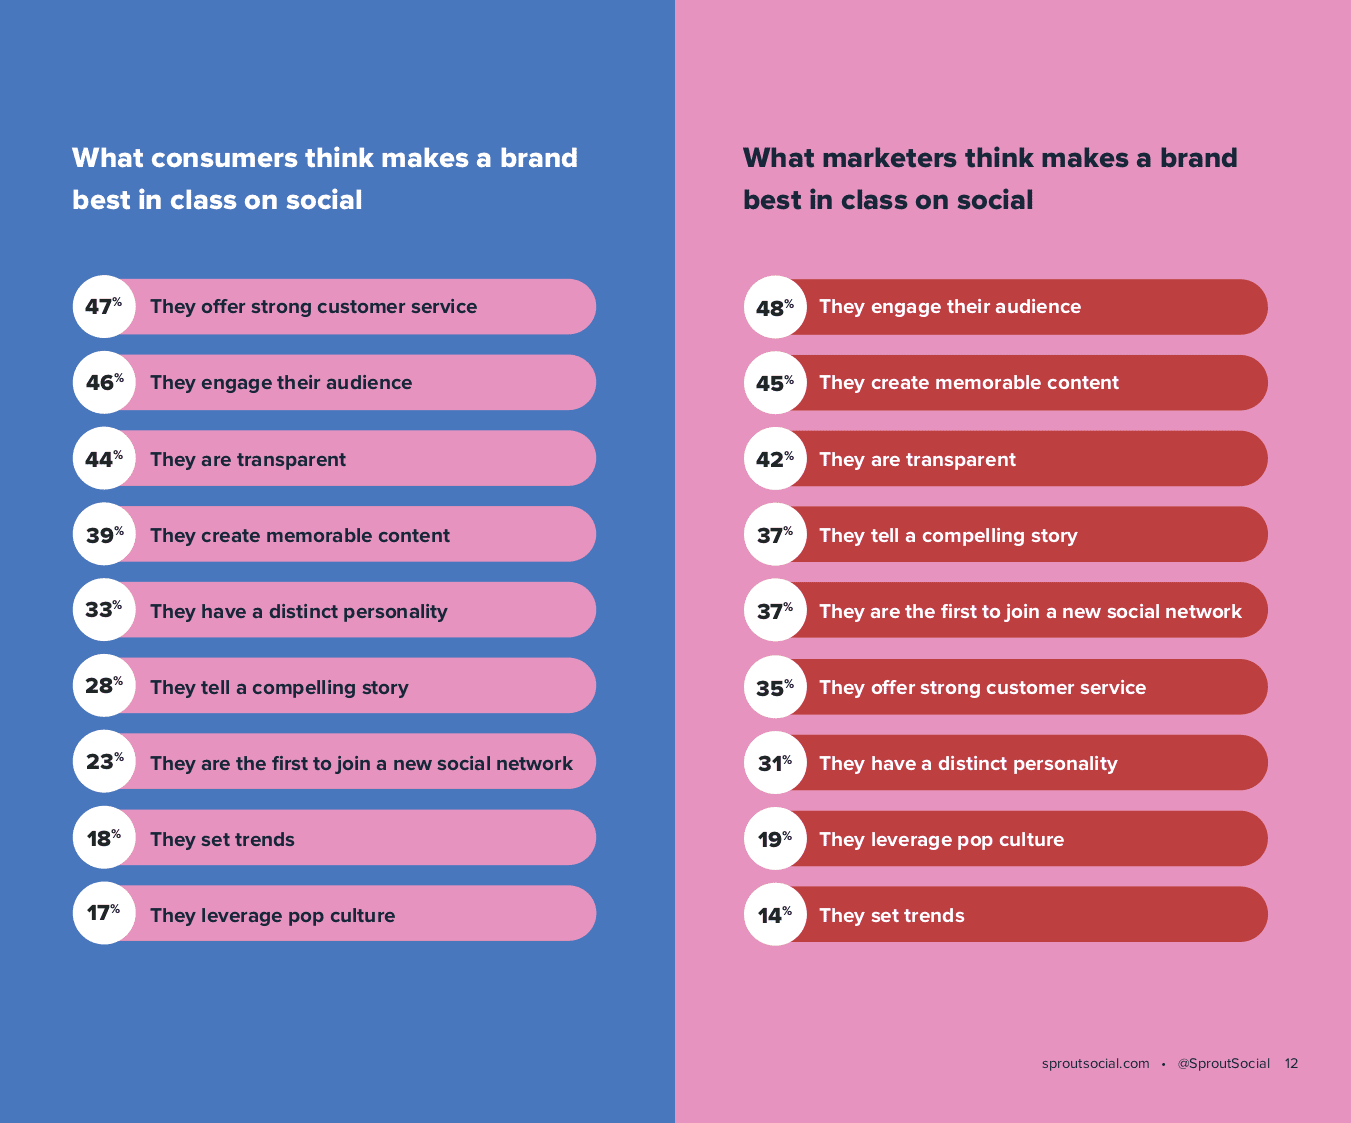 listing of what consumers think makes a brand best in class on social vs. what marketers think